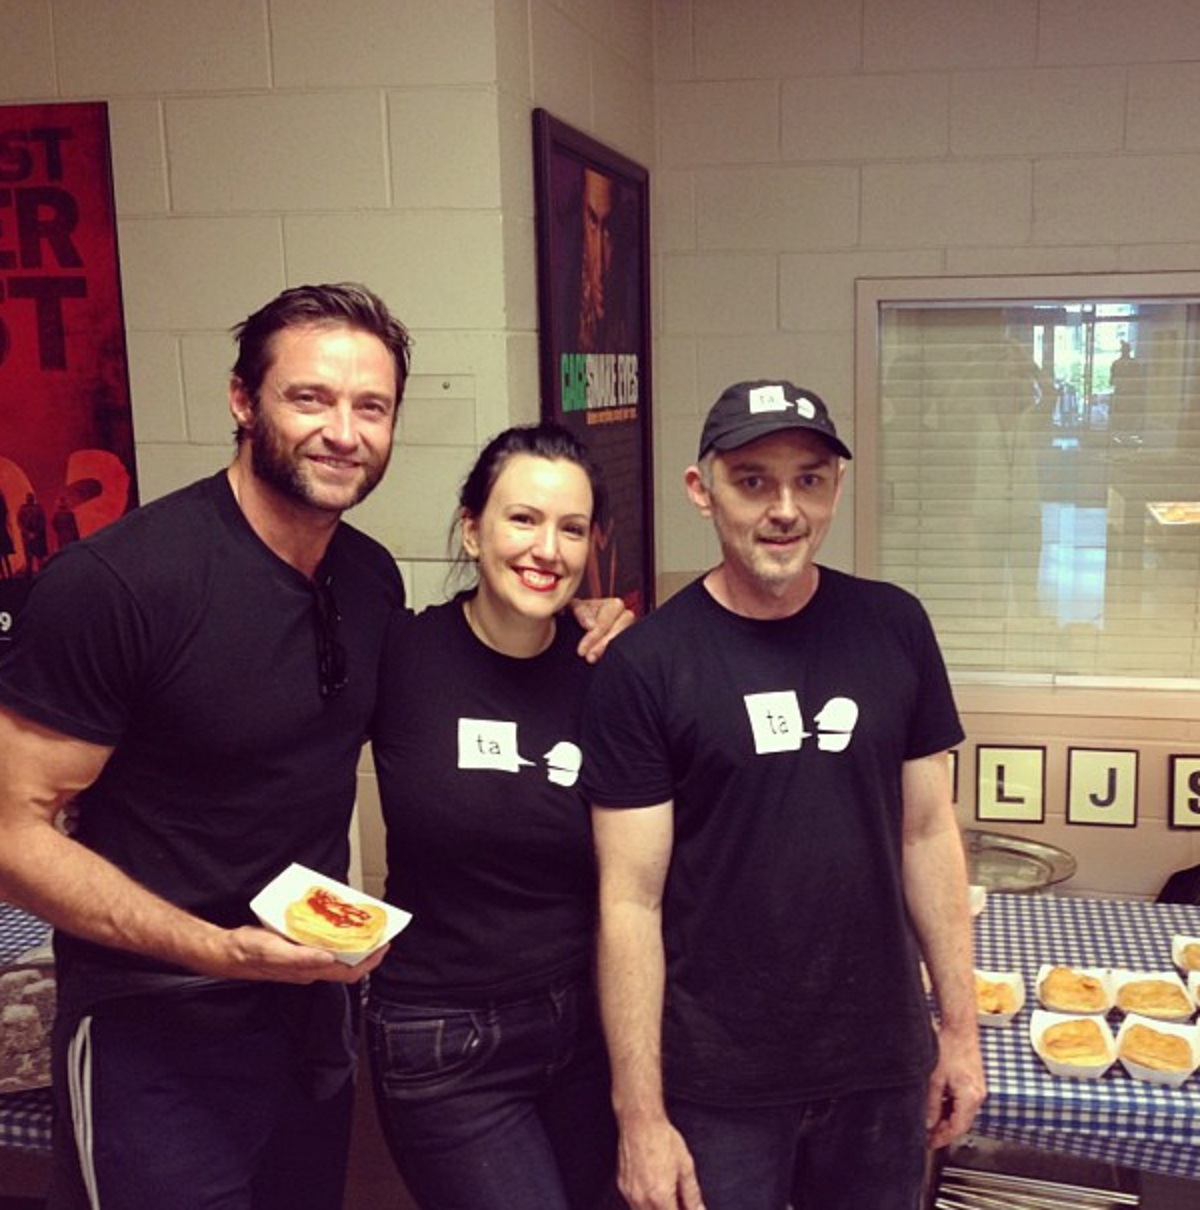 Hugh Jackman, who has been shooting X-Men: Days of Future Past in Montreal, shared on social media a picture of him with bakery owners Don Hudson and Melanie Deslaurier. 